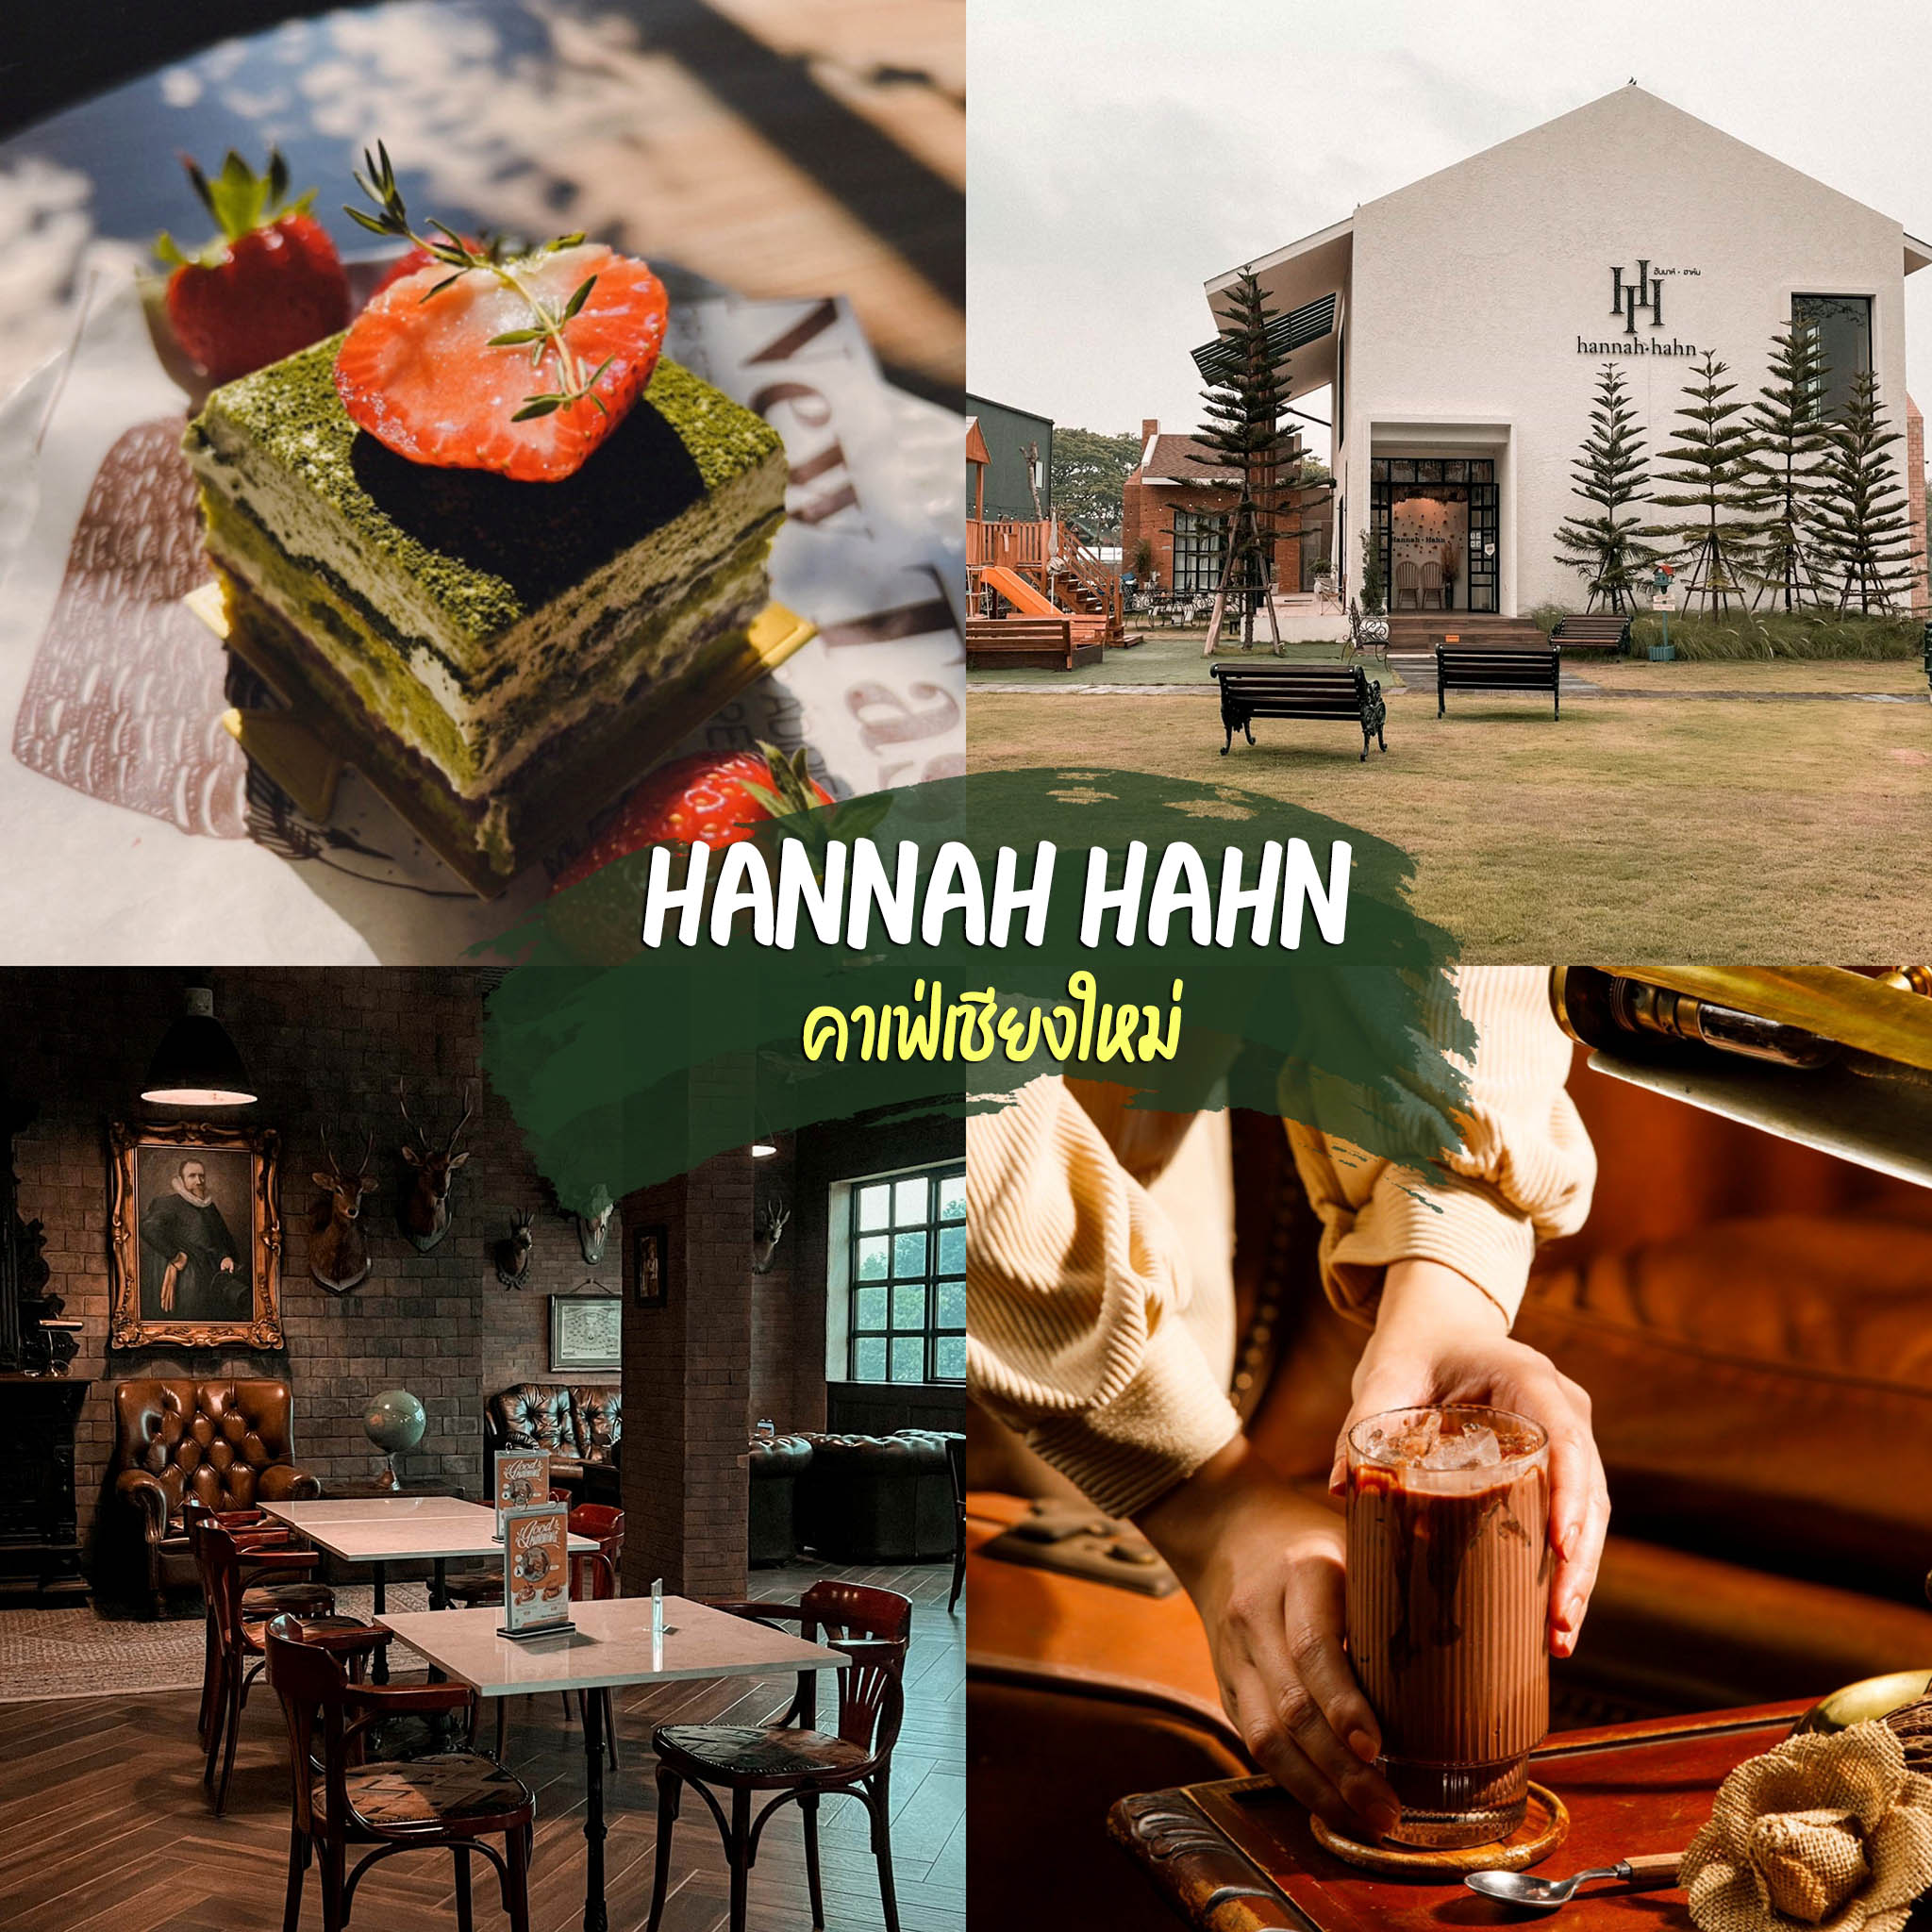 HANNAH HAHN Hannah Hahn, a European-style Chiang Mai cafe with both Indoor and Ourdoor zones. I'd say you have to check in.